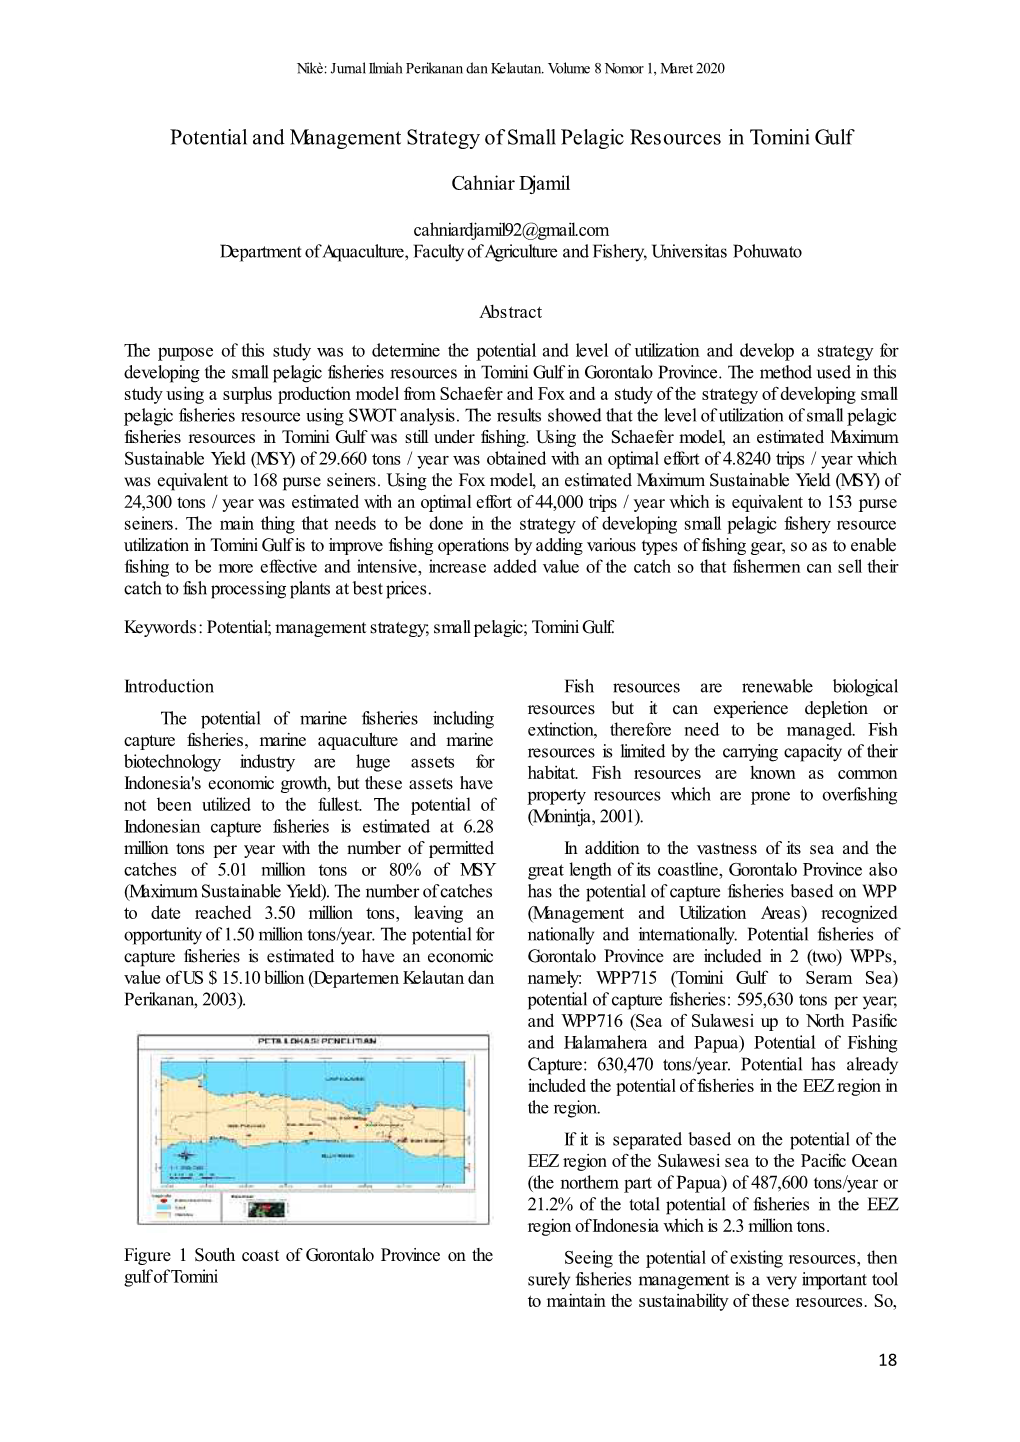 Potential and Management Strategy of Small Pelagic Resources in Tomini Gulf